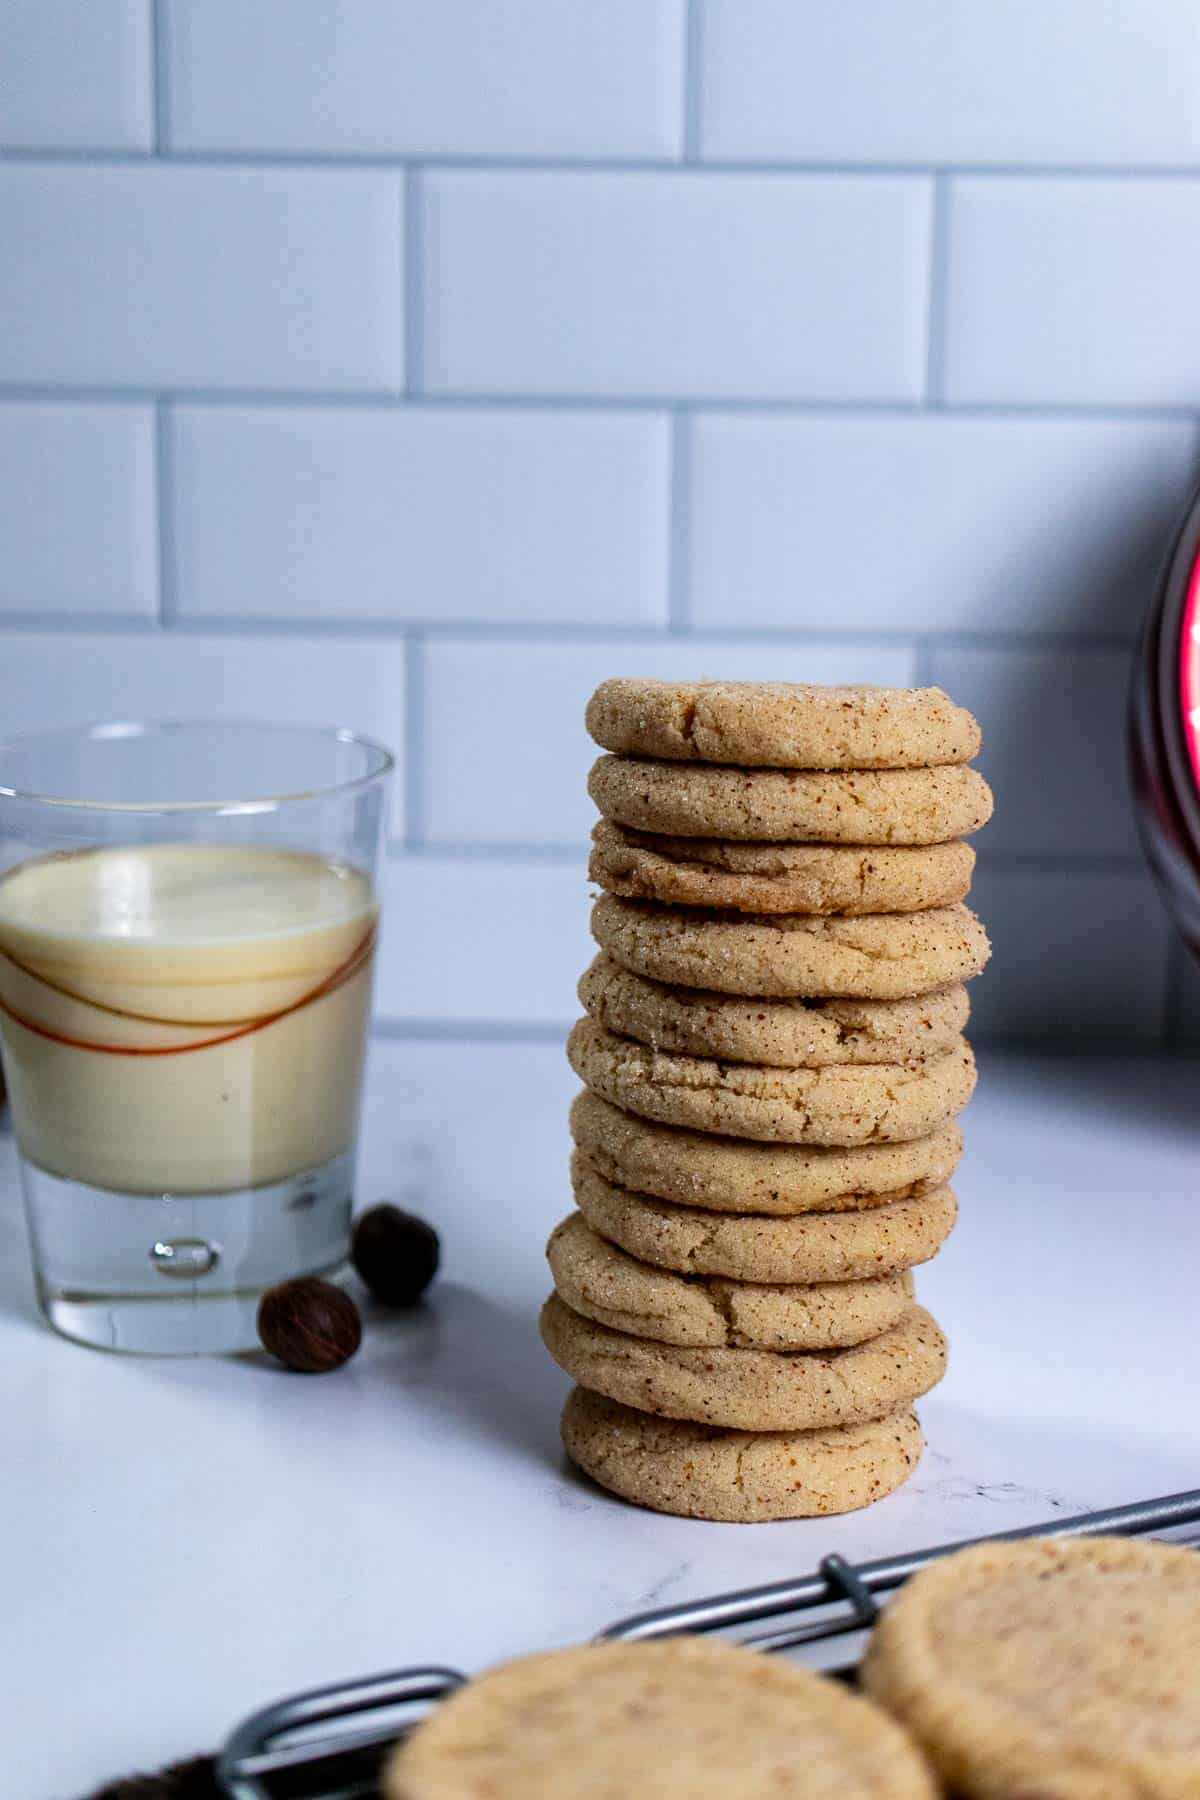 A stack of eggnog snickerdoodles with a glass of eggnog beside them.